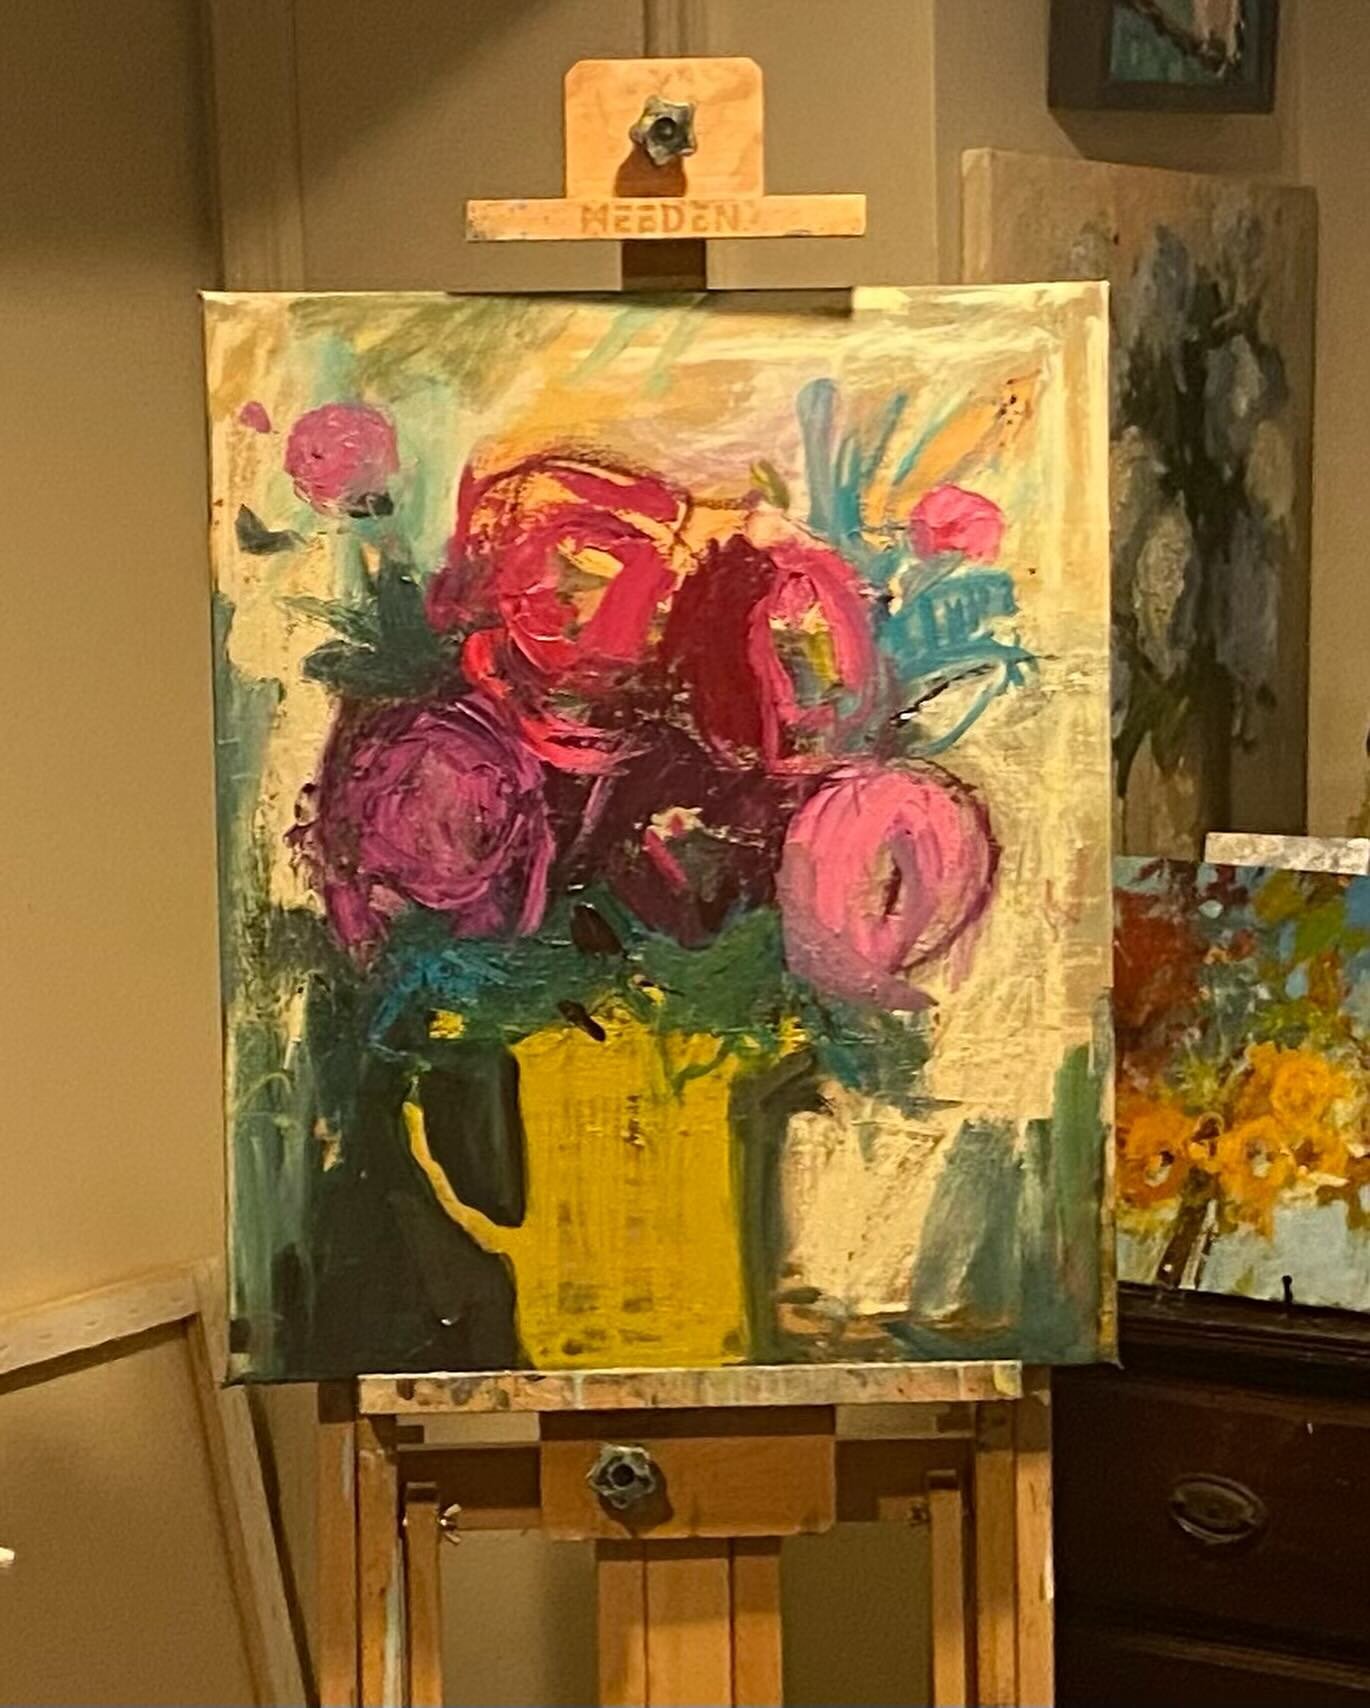 Got a great, loose start on this colorful floral but OMG my studio took a hit. Send help. WIP
.
.
.
#wip #oilpainting #floralpainting #peonypainting #peonys #njartist #nantucketartist #nantucketstyle #njoilpainter #abstractflorals